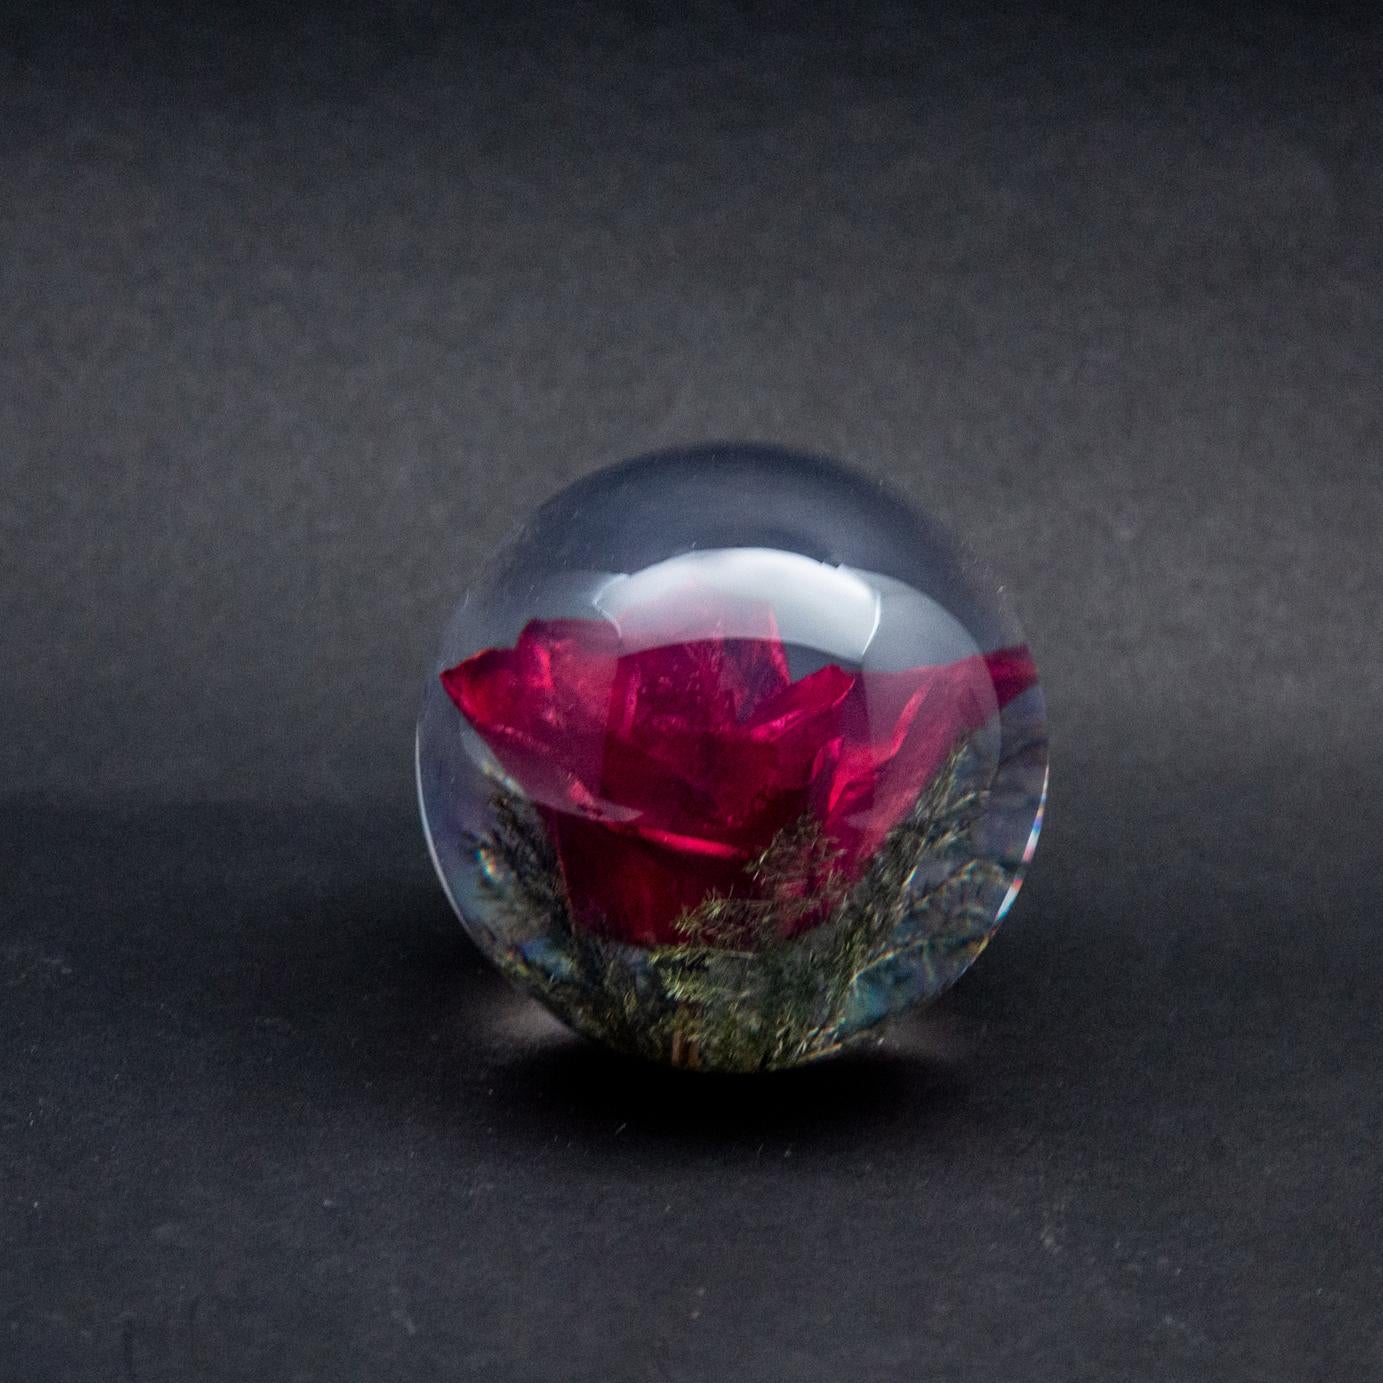 Red rose paperweight. Created from an encased, natural red rose. Measure: 3